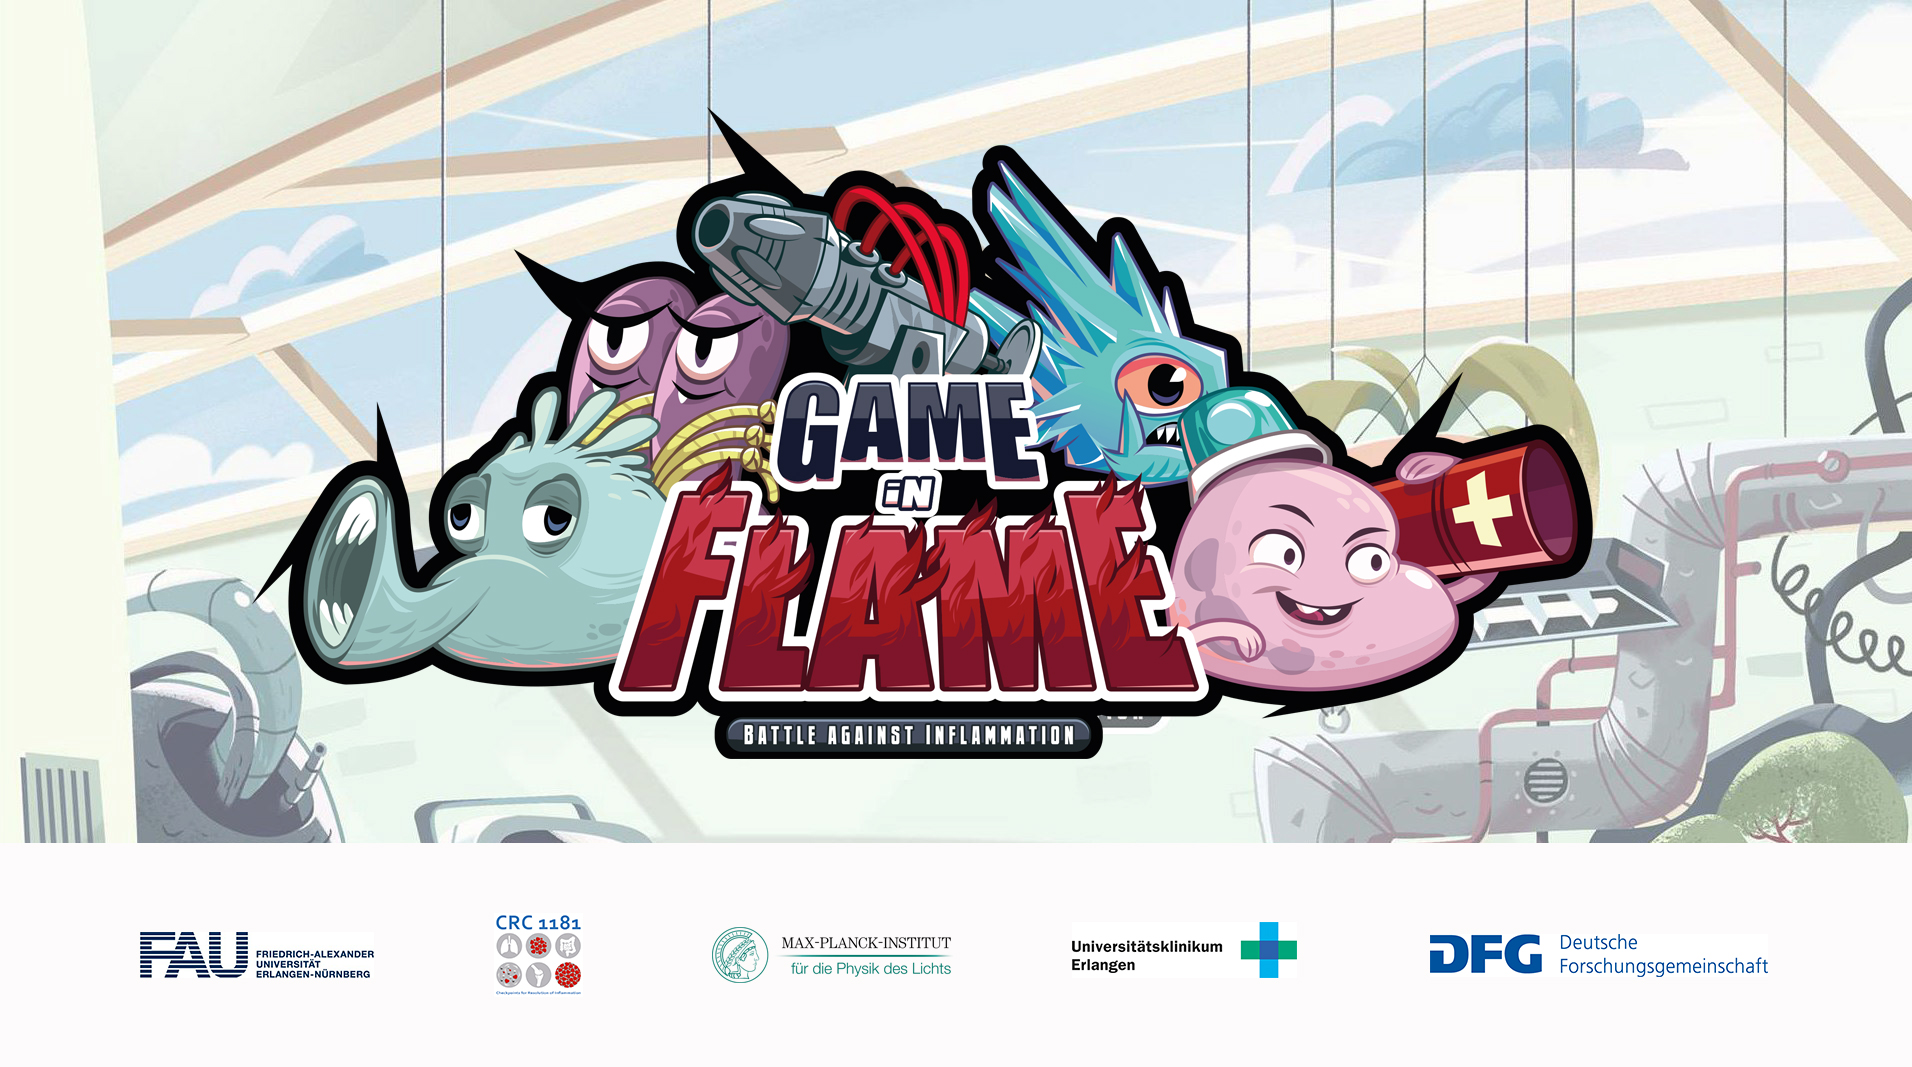 Towards entry "“Game in flame” – a serious game for medical education to go"